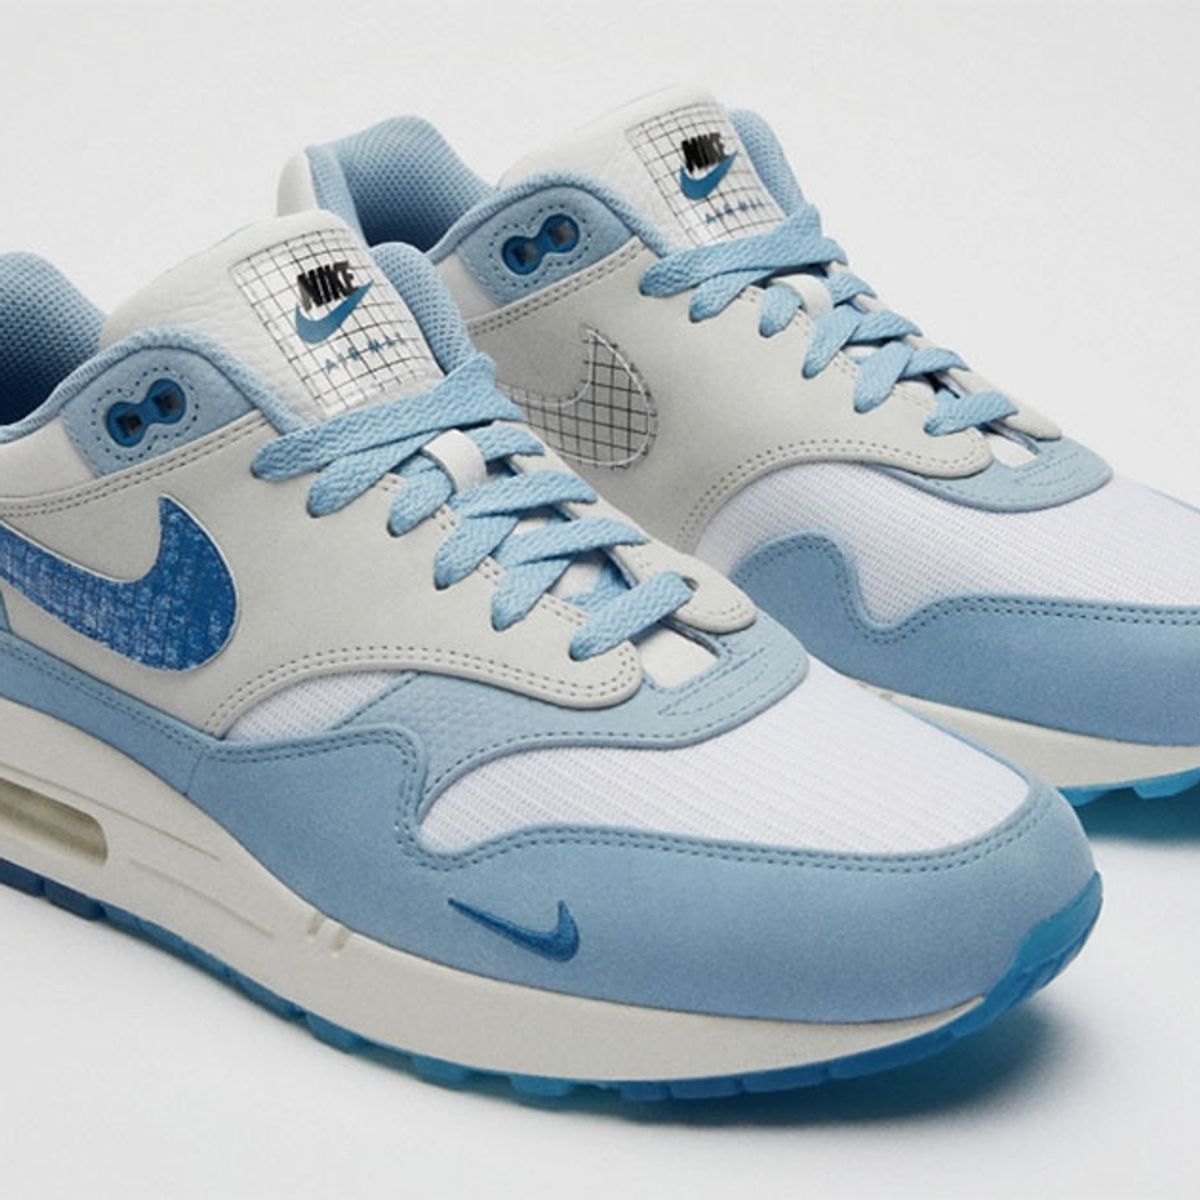 The Nike Max 1 'Blueprint' is a North America for Air Max Day Freaker